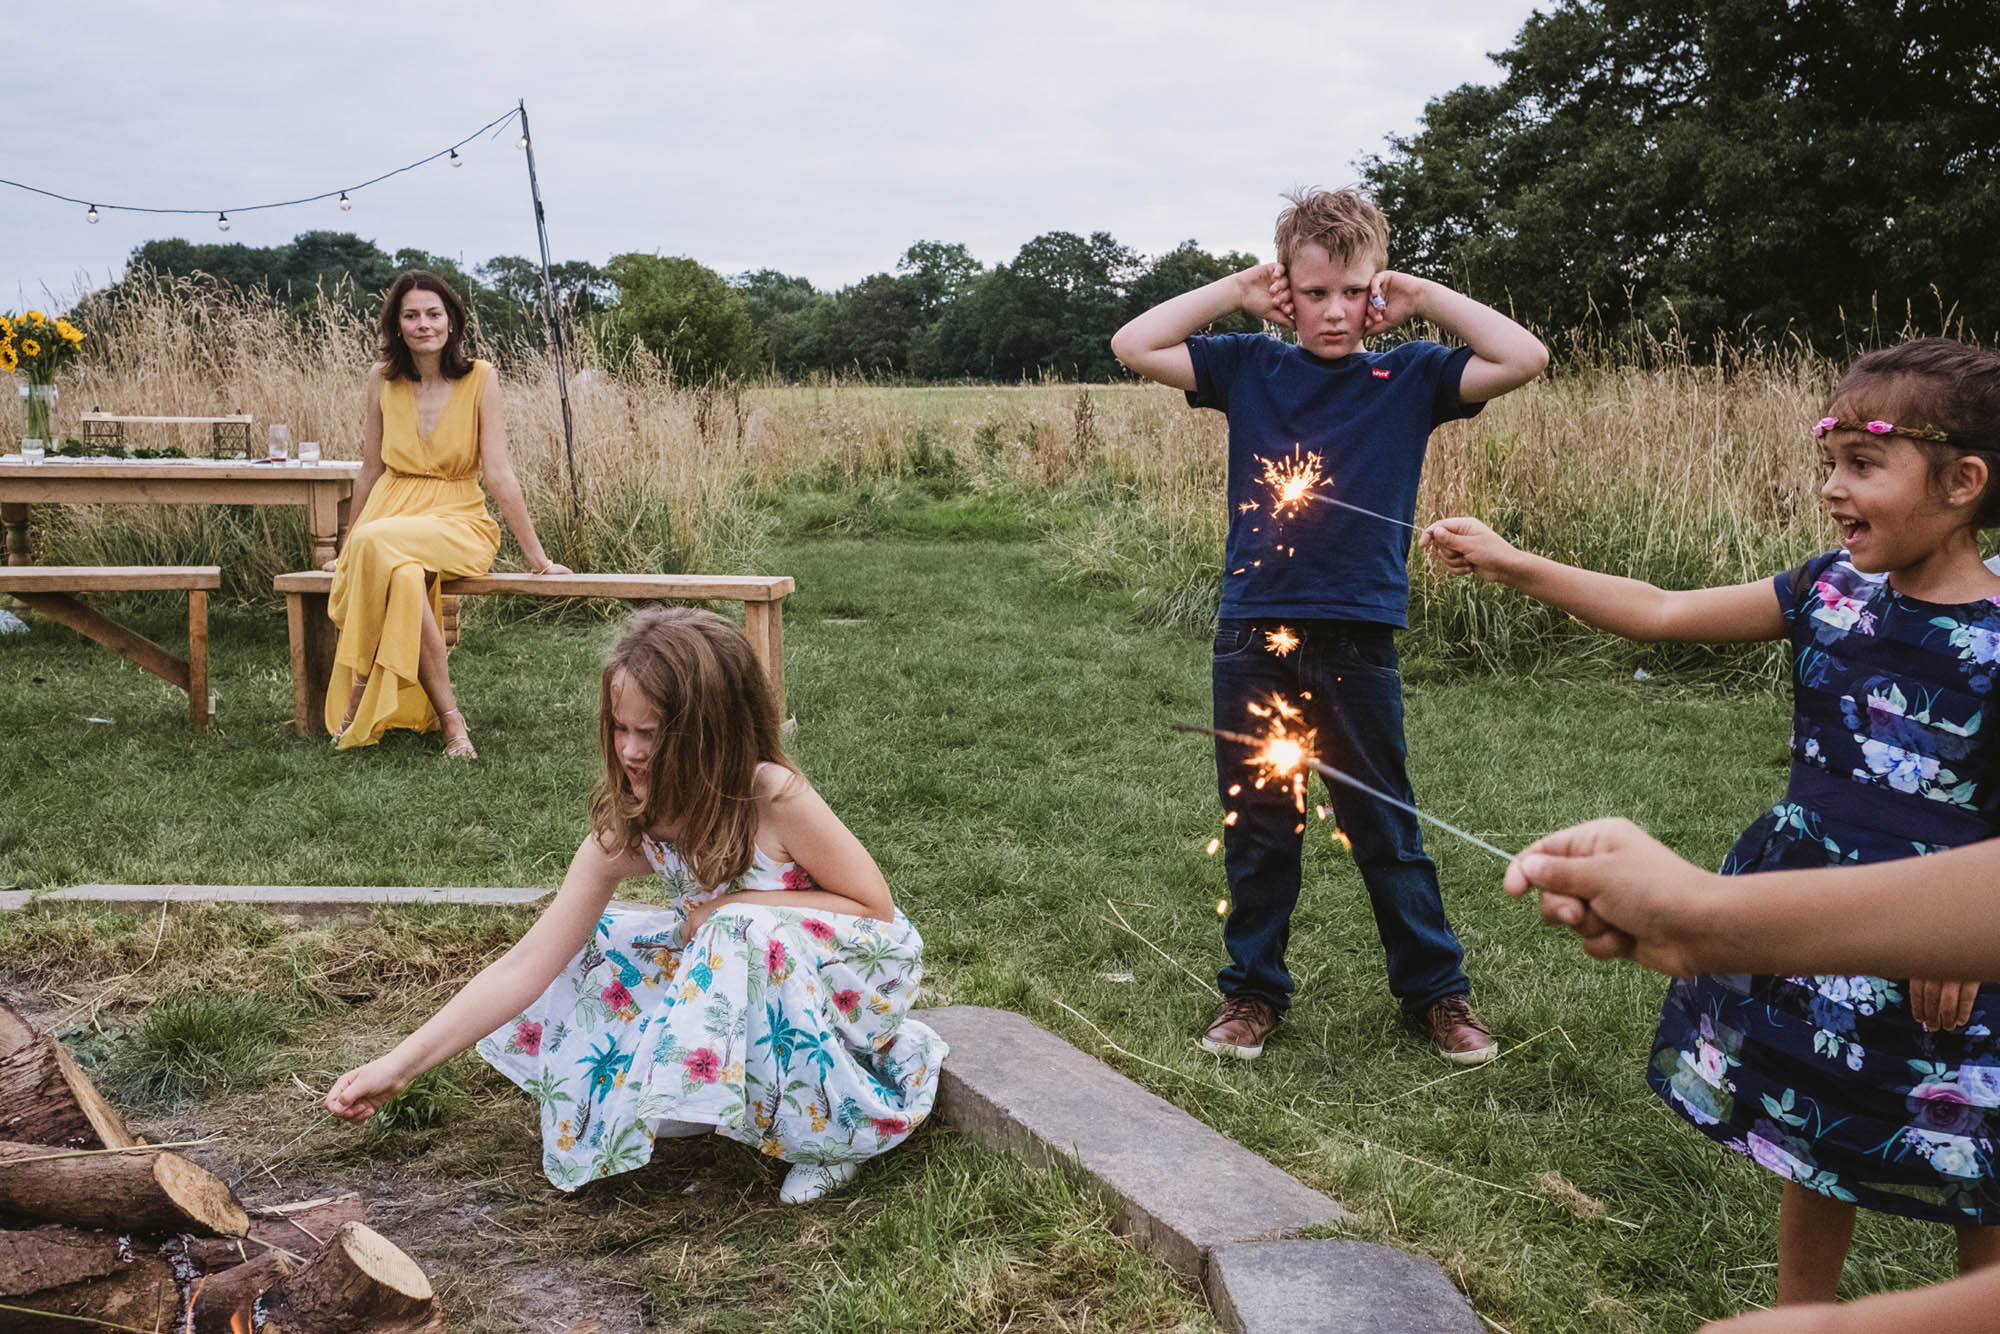 Wedding photography doesn't have to be boring! Sian & Sam's guests make an adventure out of their Hertfordshire glamping wedding! With York Place Studios Photography